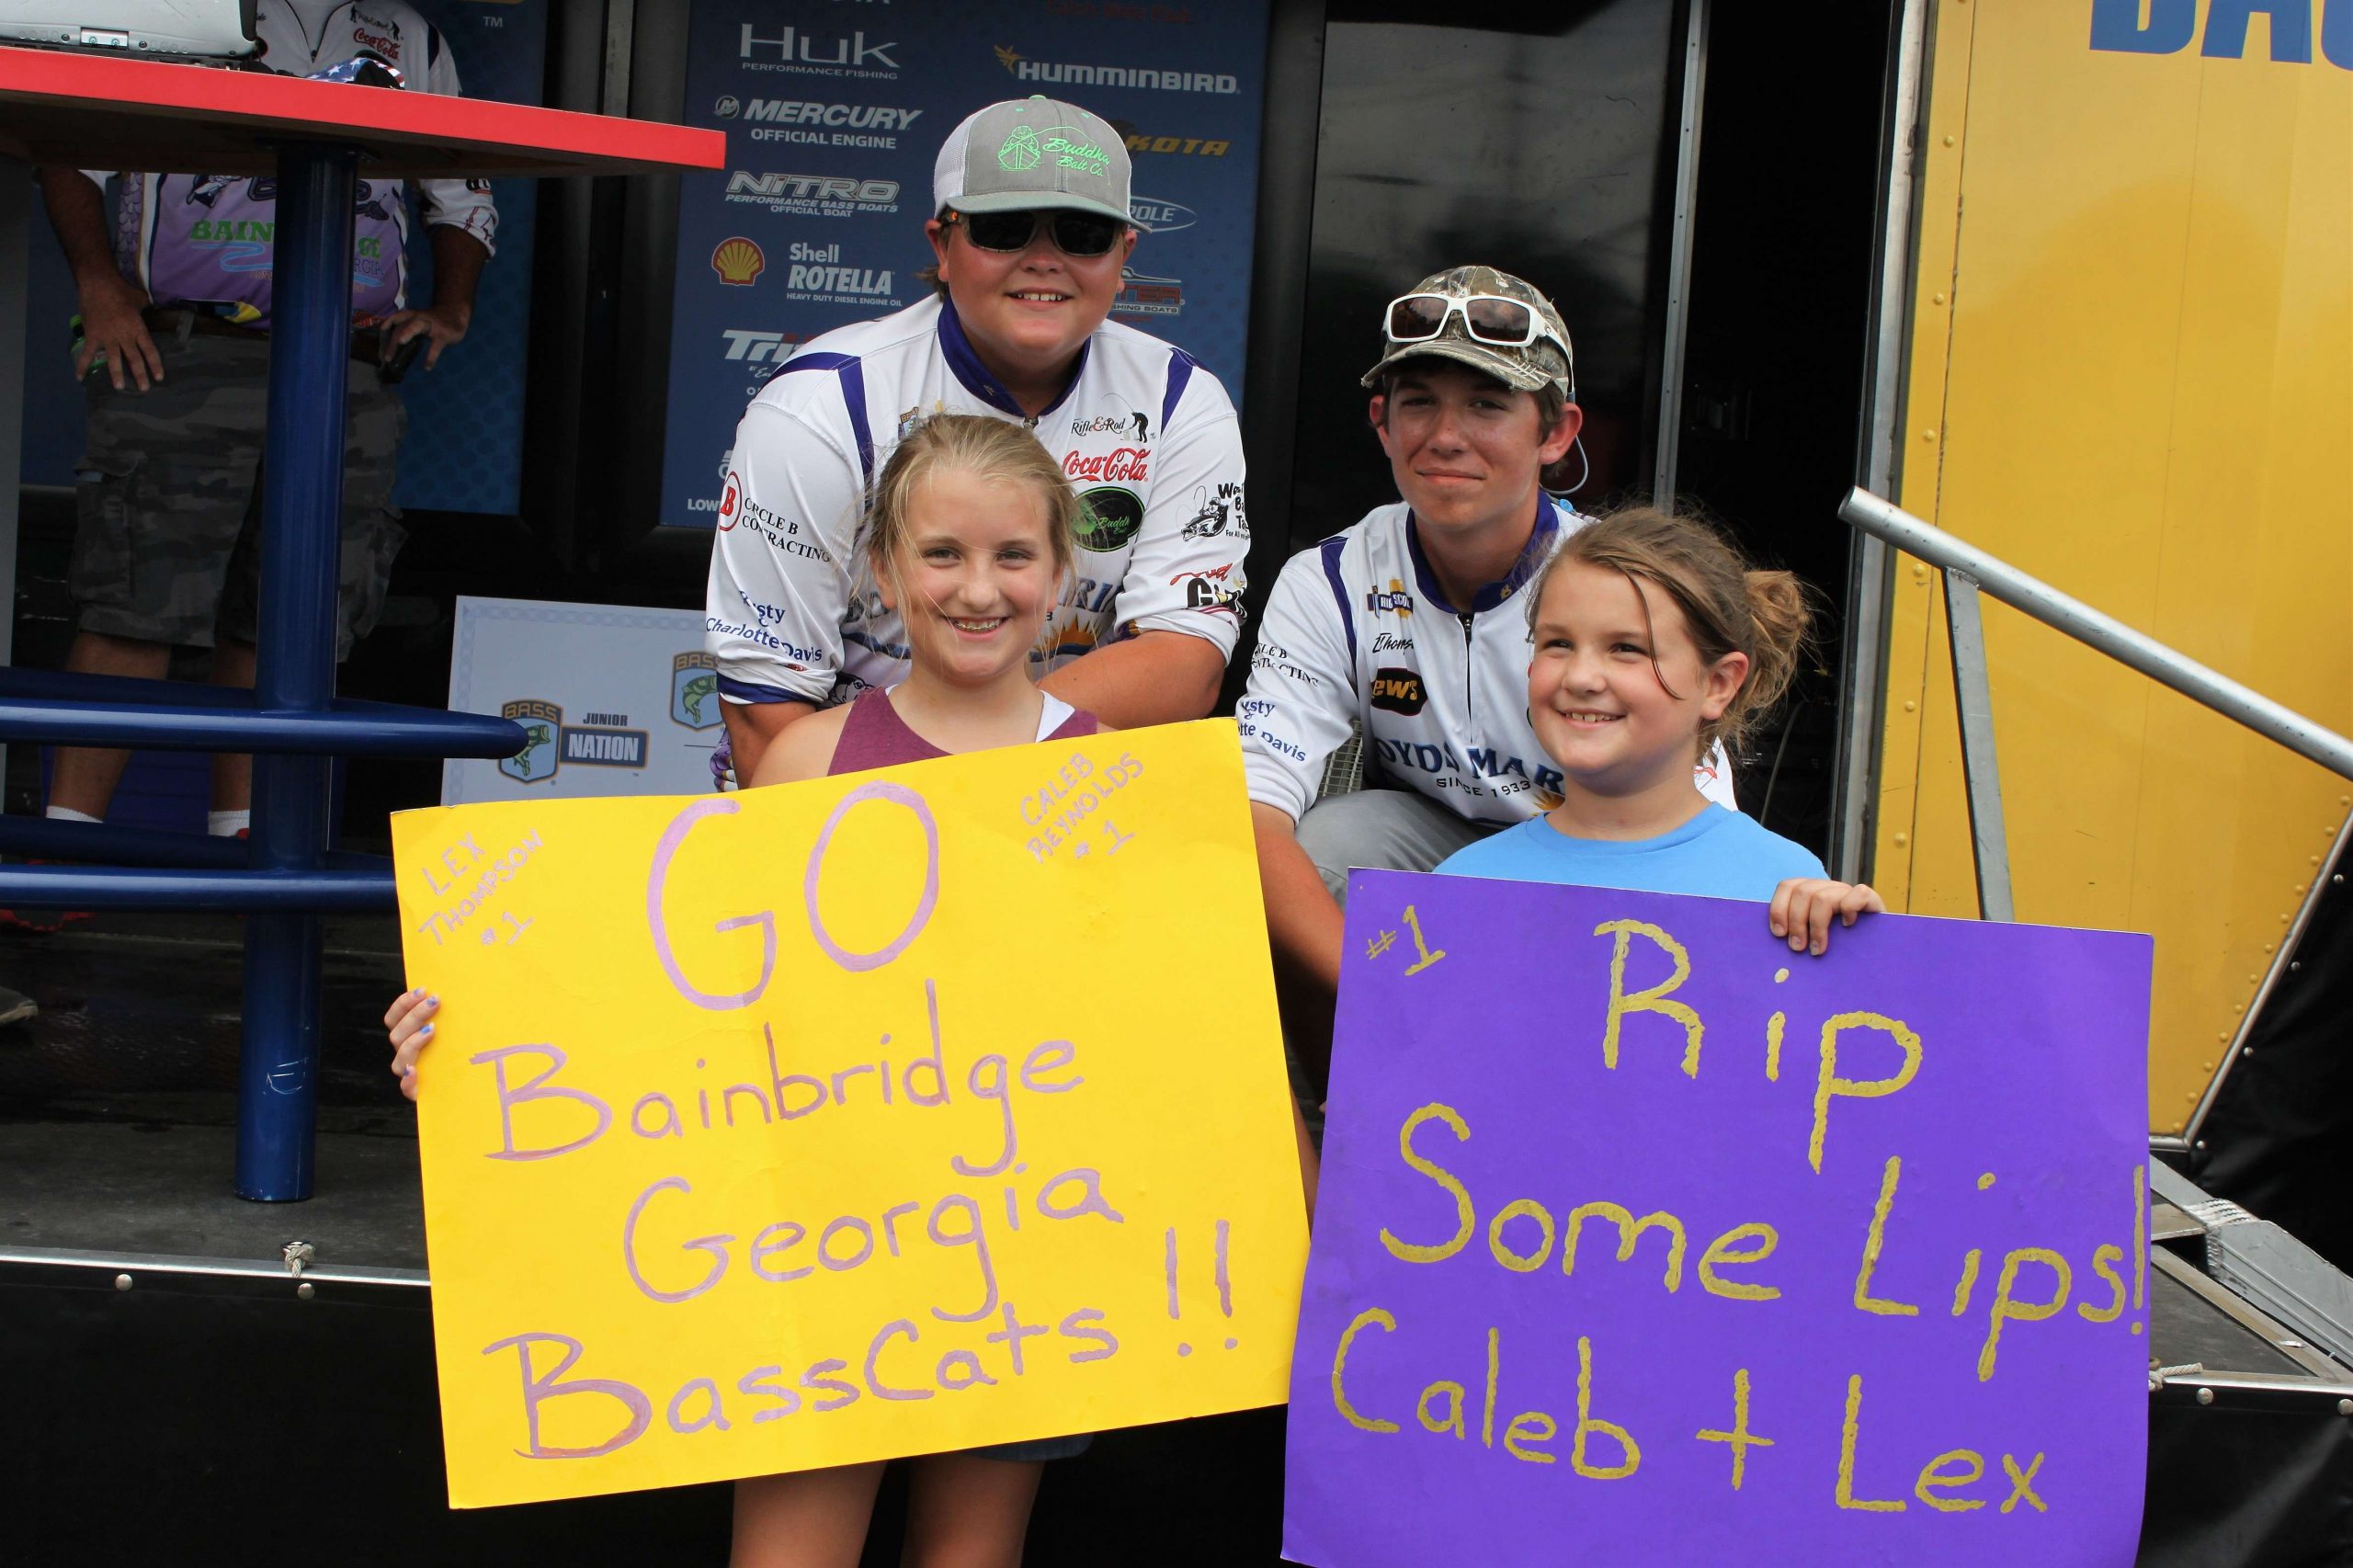 Caleb Reynolds and Lex Thompson of Georgia had a big group of supporters to cheer on their 31st place finish. Lexâs sisters Dallis and Drew shared the encouragement on these purple and gold signs. Thereâs the family spirit!
